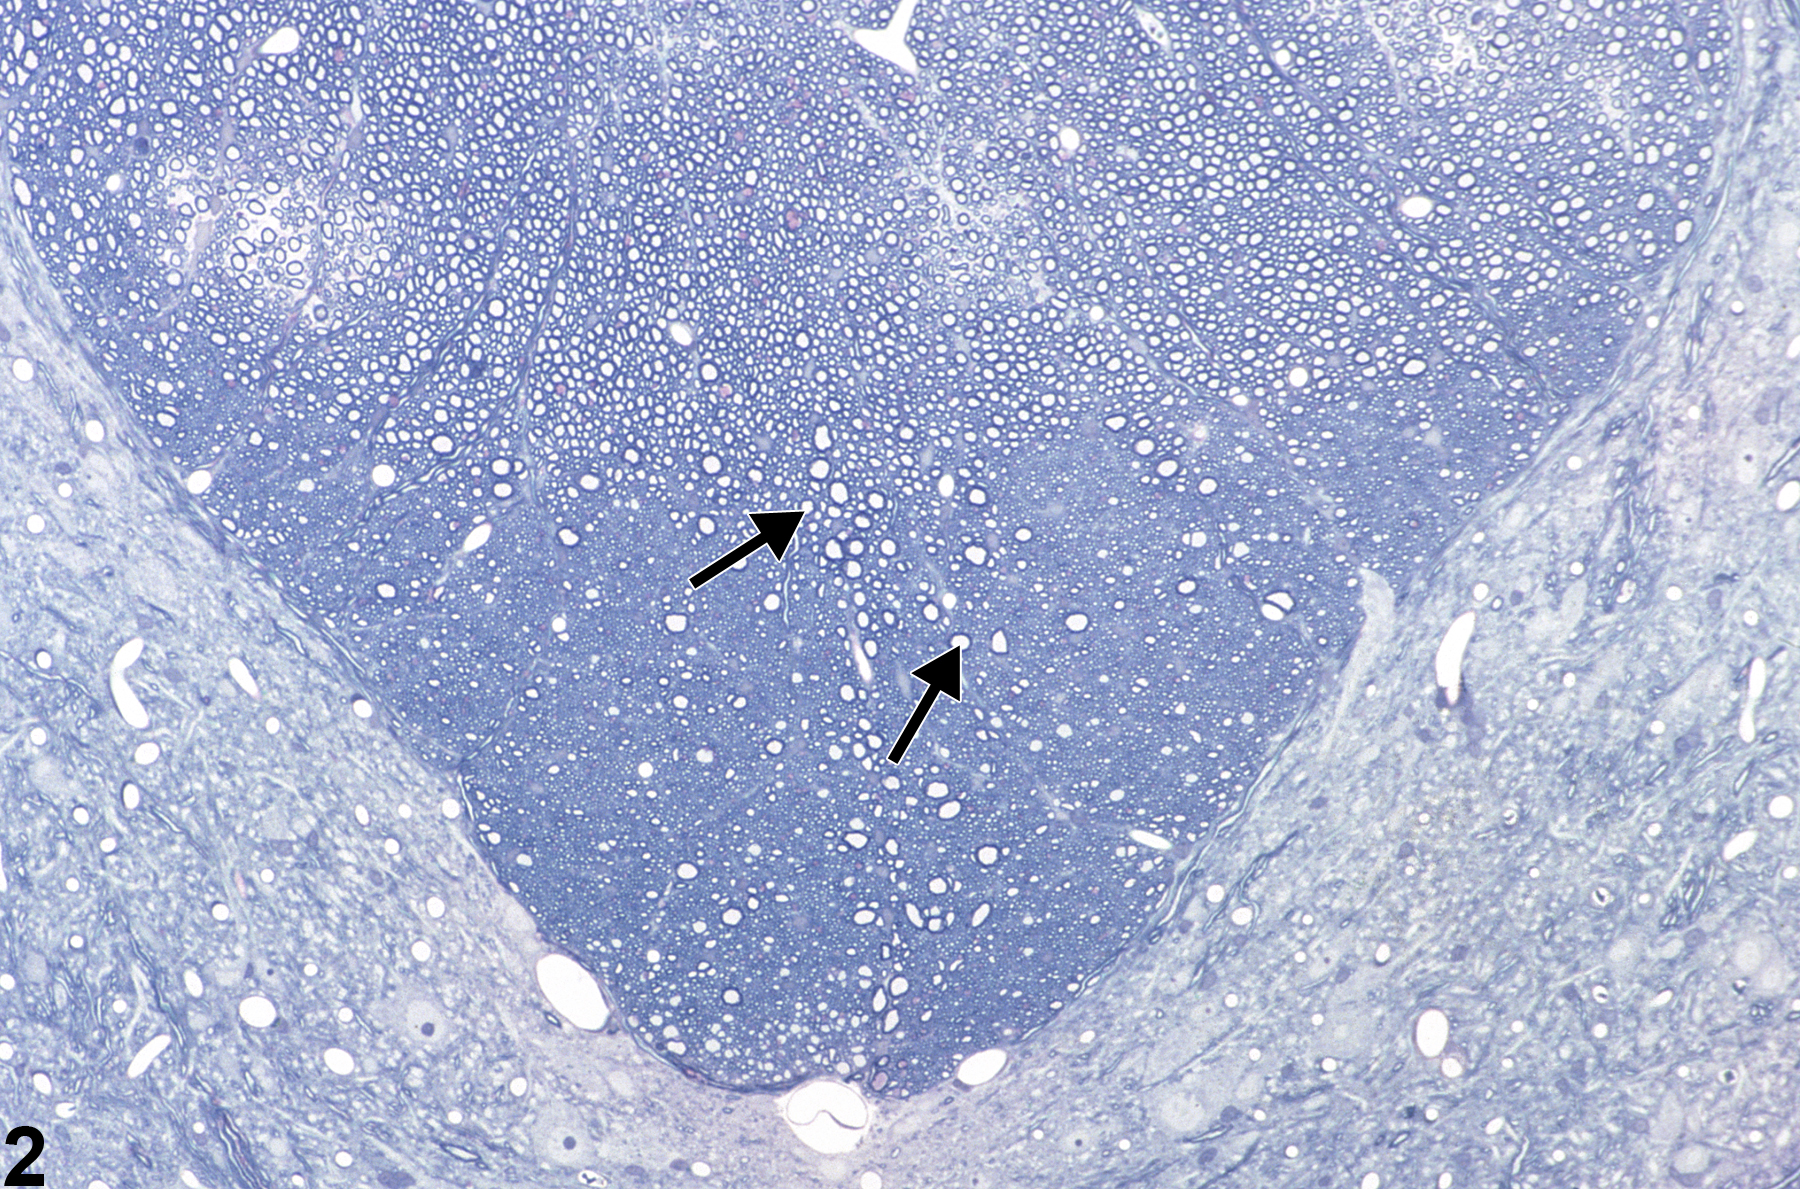 Image of axonopathy in the spinal cord from a male F344/N rat in a subchronic study